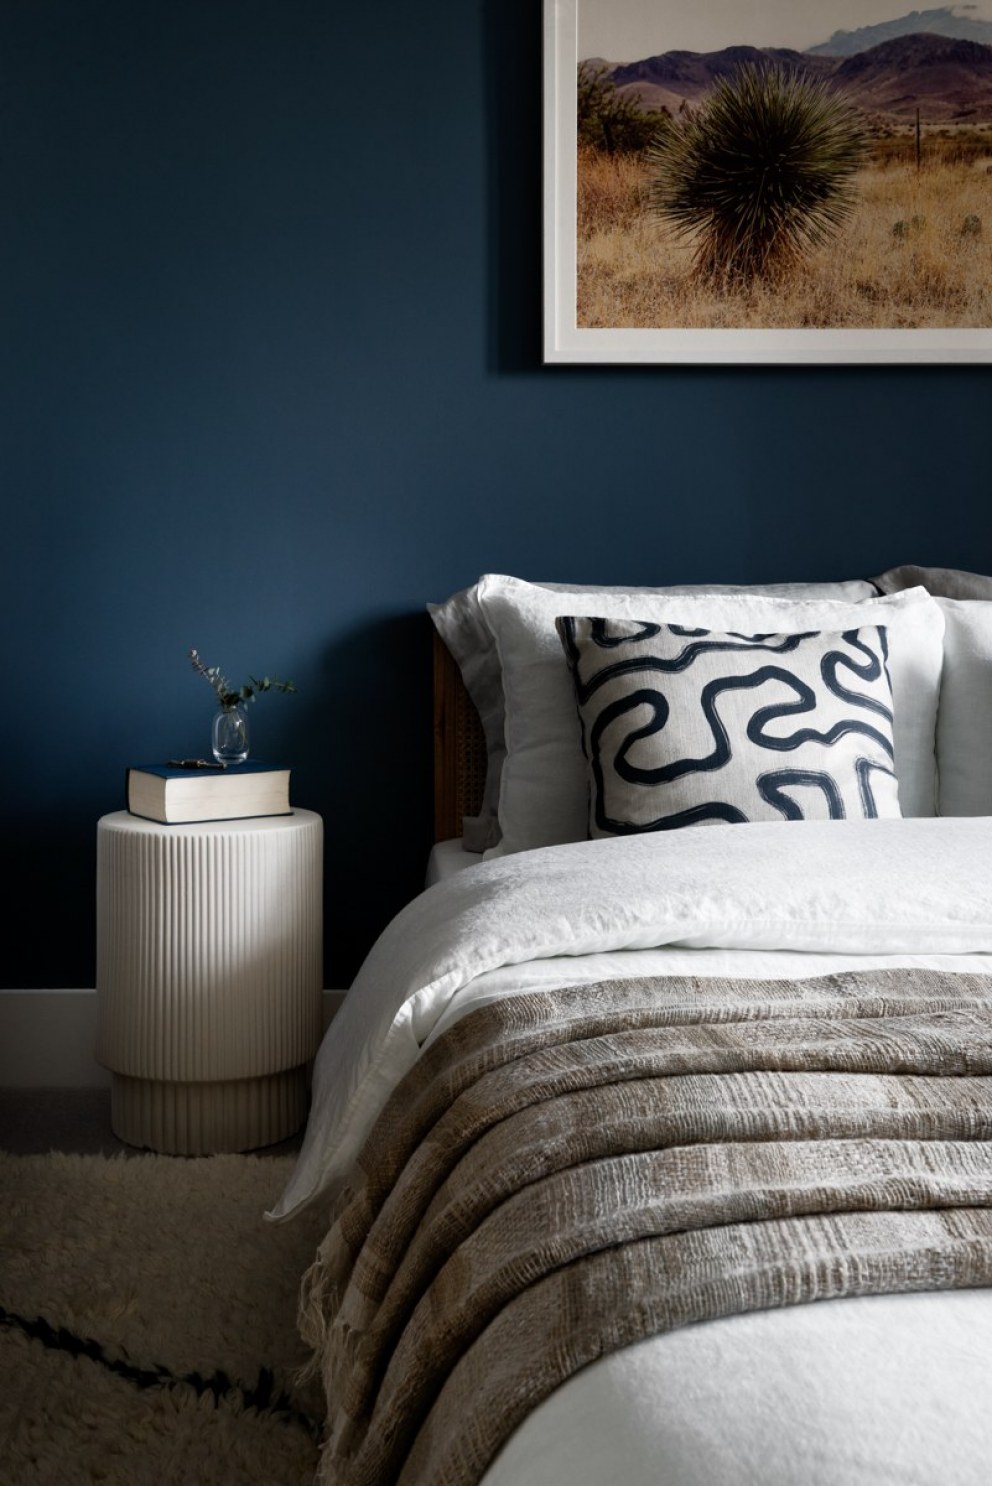 Kindred House showhome | A moody bedroom | Interior Designers